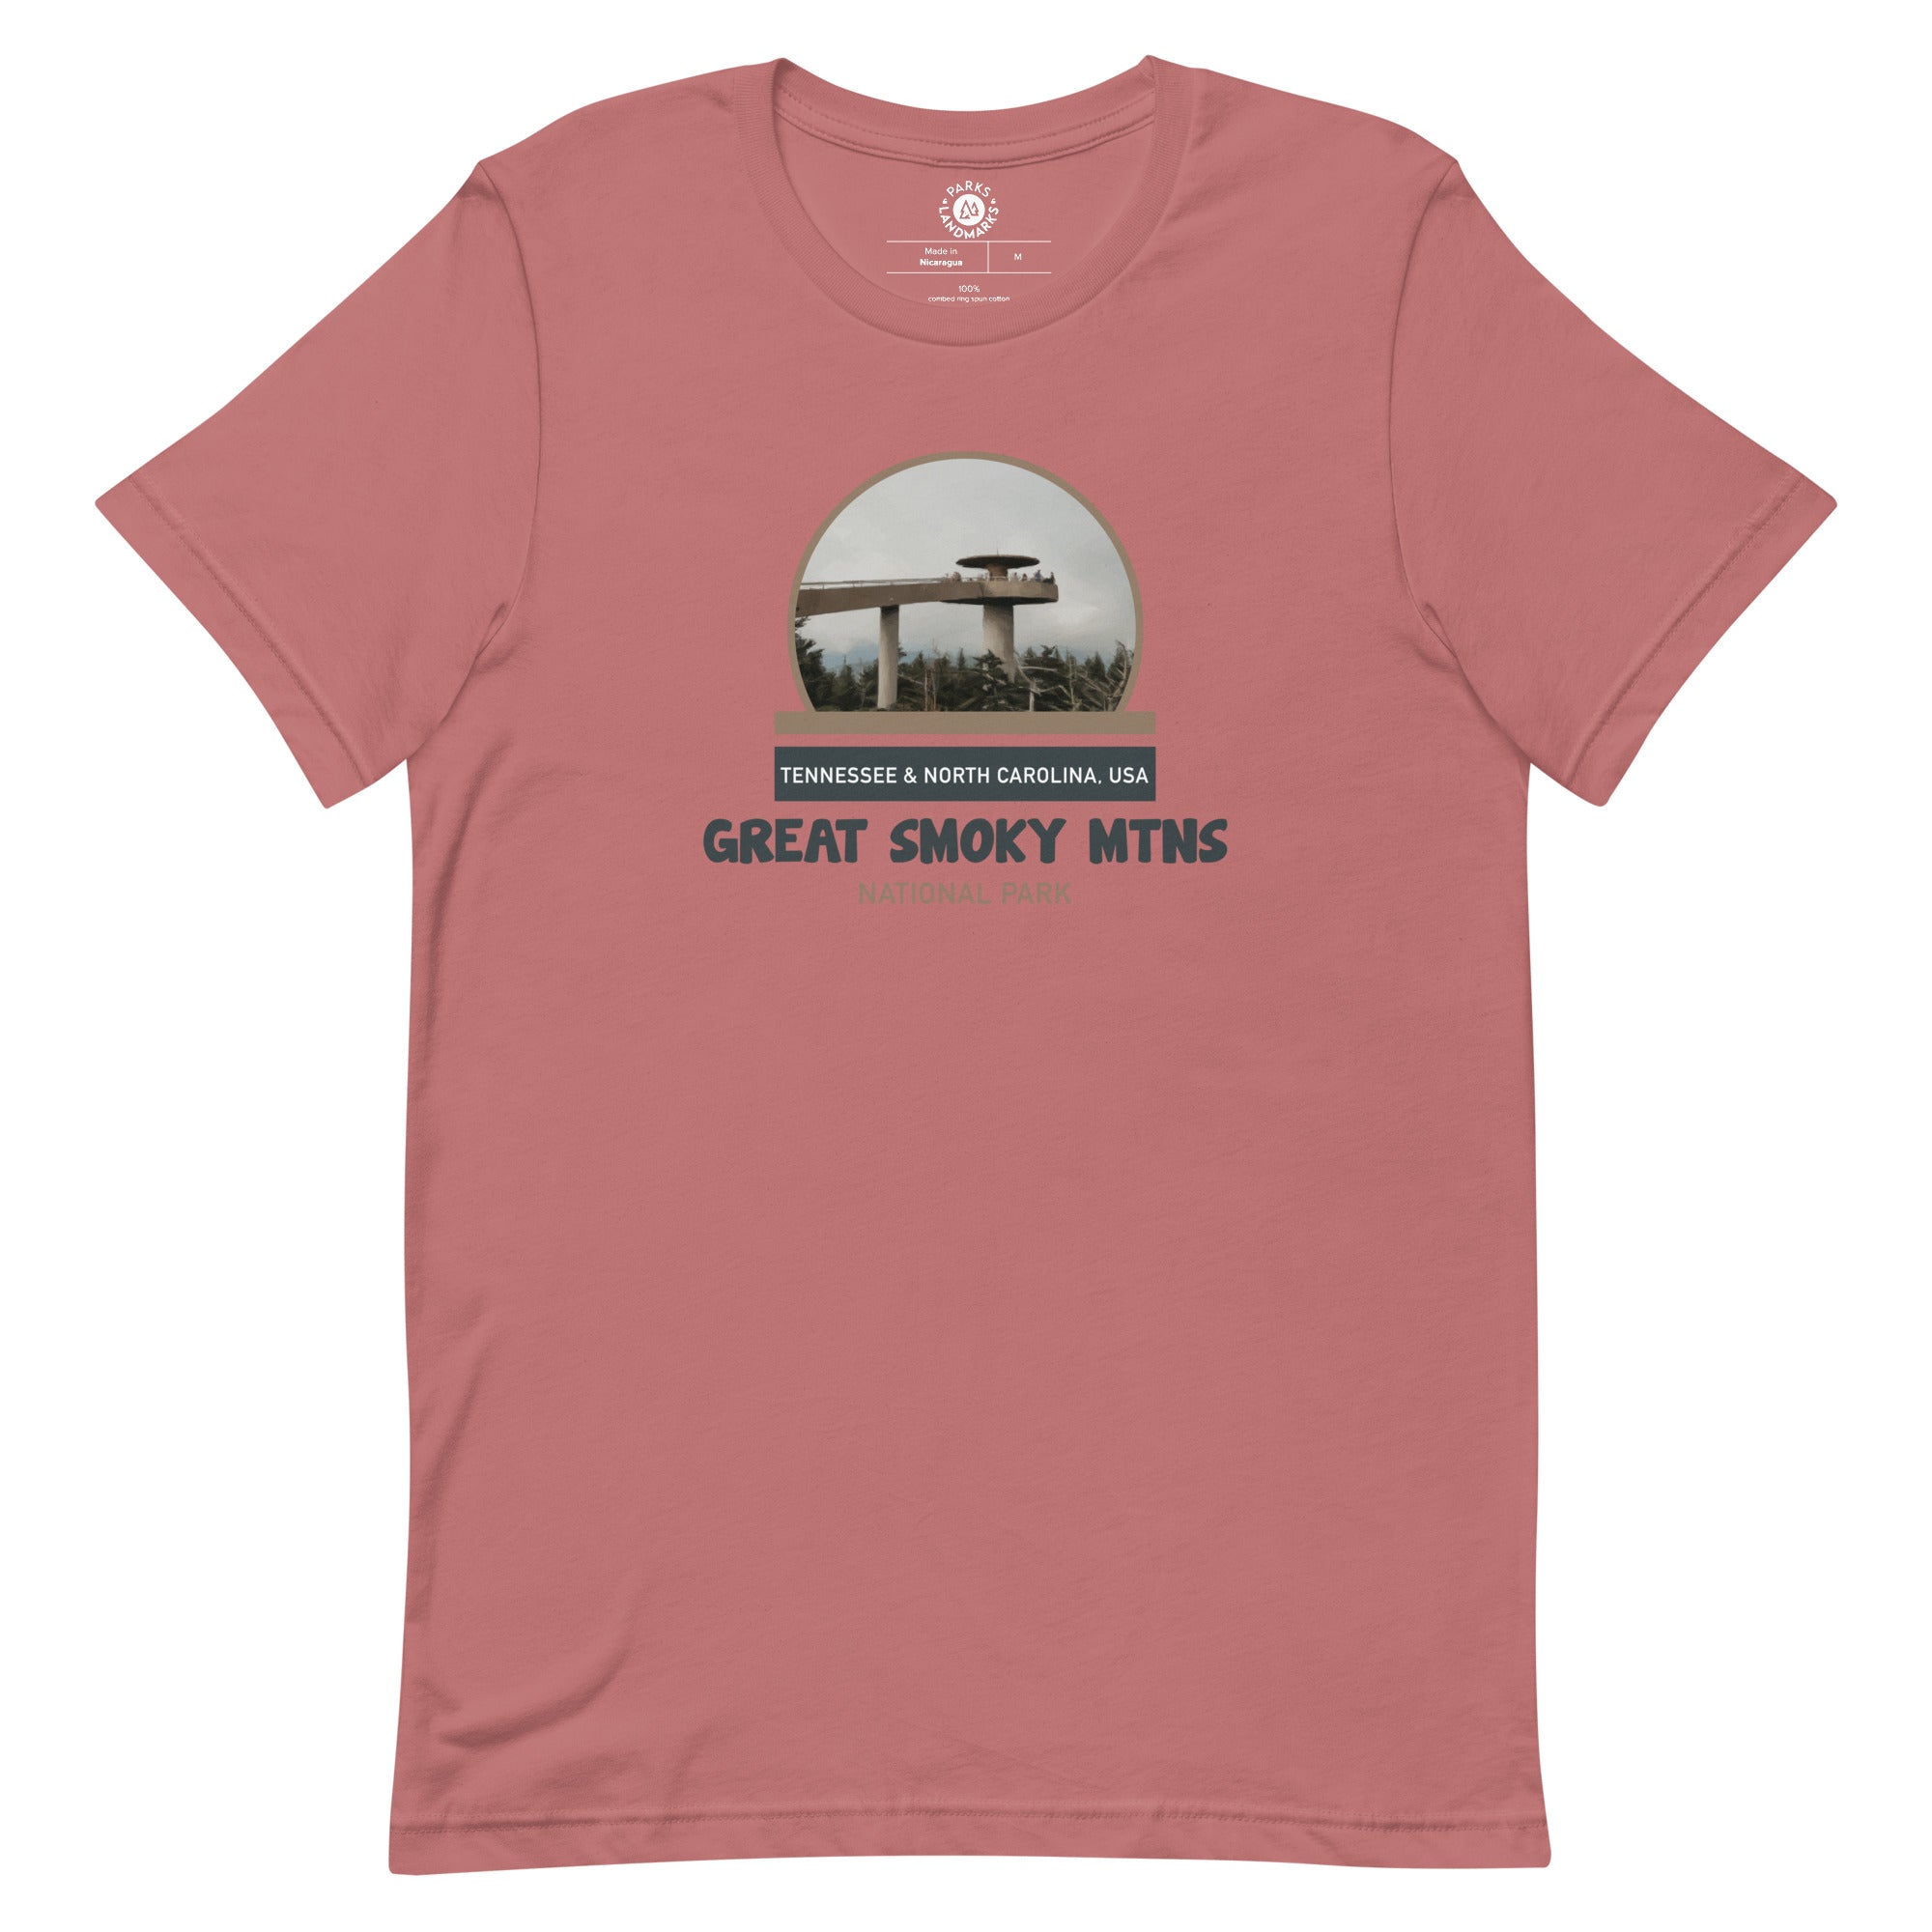 Great Smoky Mountains “Rep The State” Shirt - Great Smoky Mountains National Park Shirt